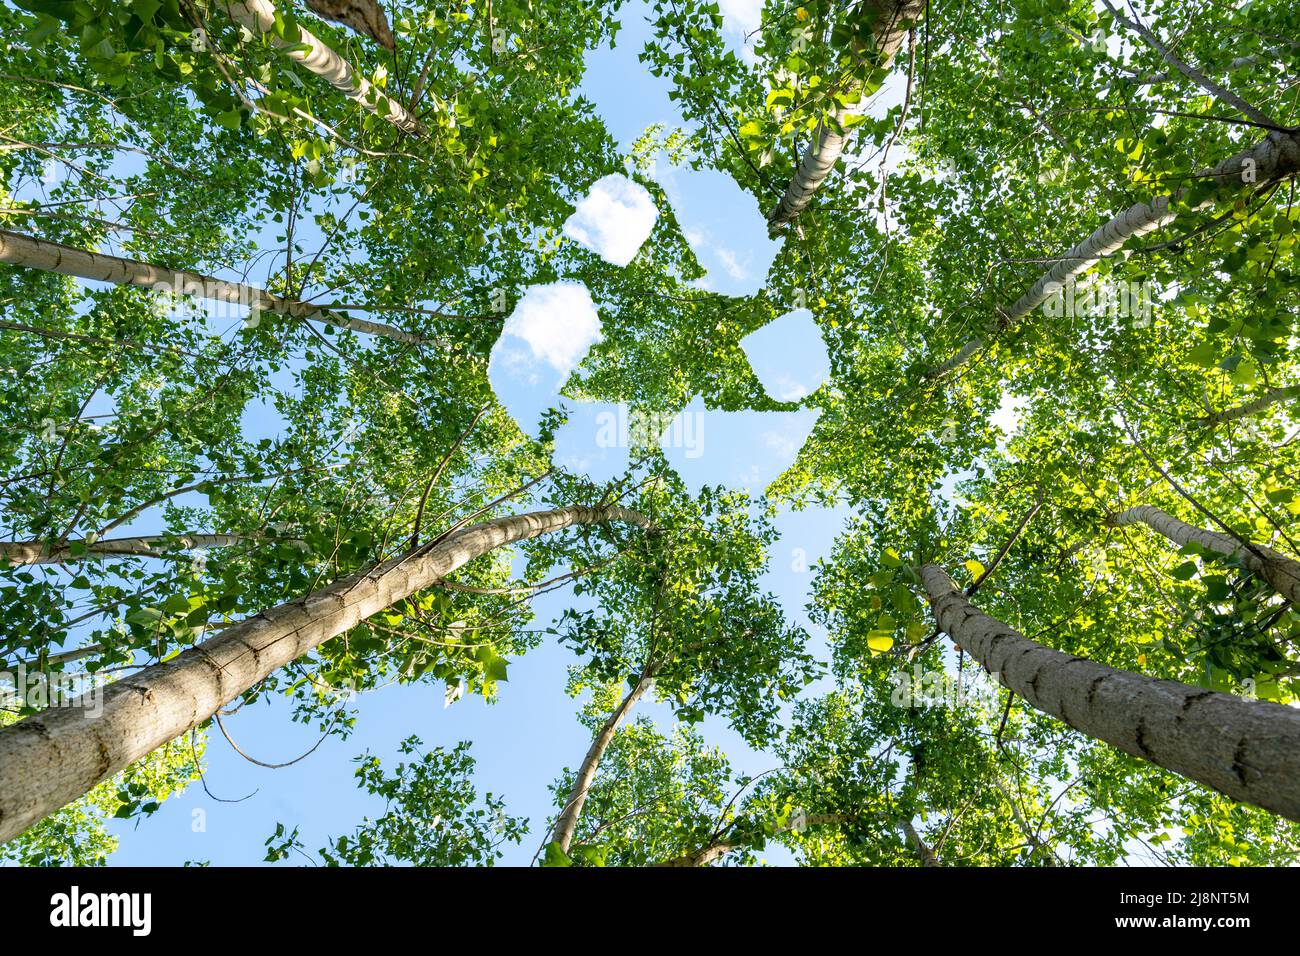 Below photo of poplar trees and recycle icon design on sky as a symbol of clean air quality. Concept of reducing carbon emissions and air pollution. Stock Photo